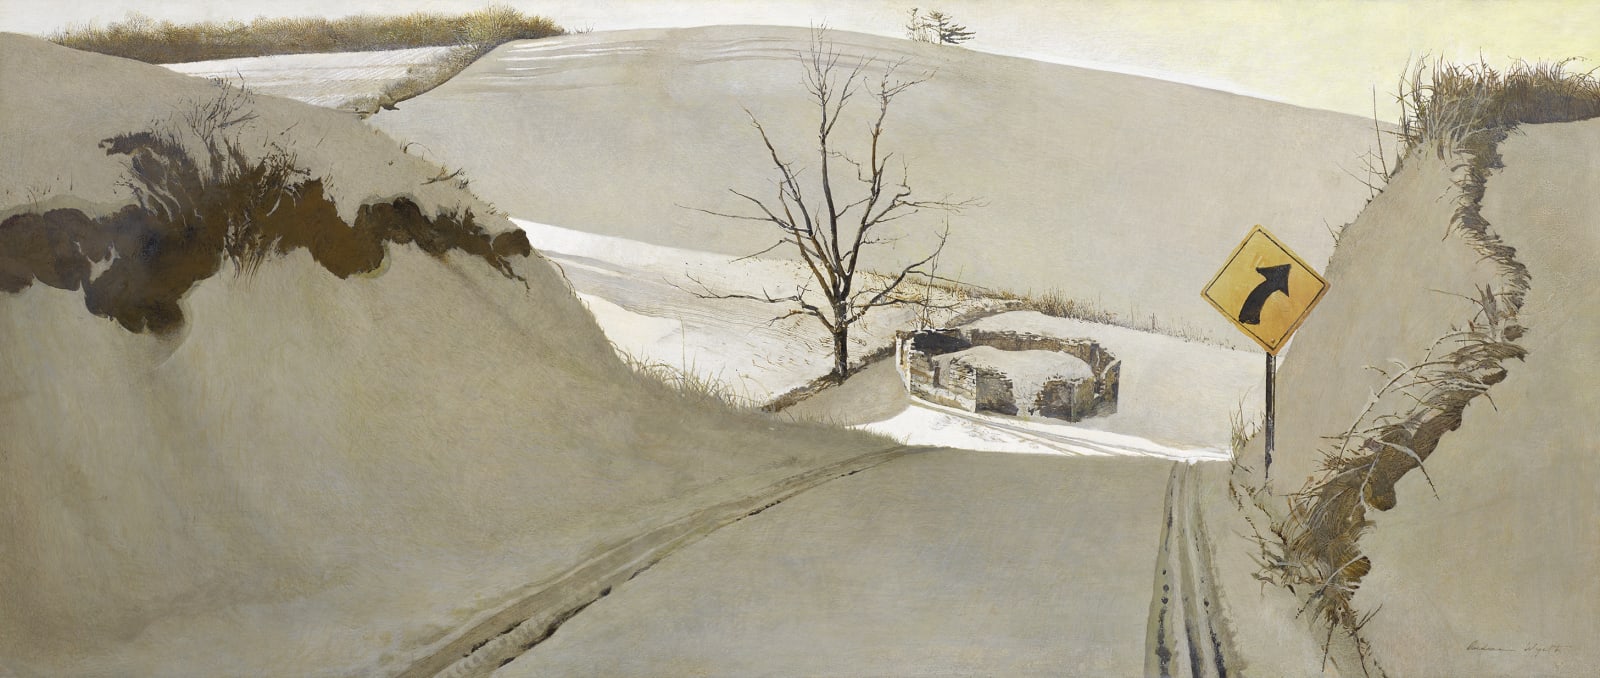 Andrew Wyeth, Ring Road, 1985